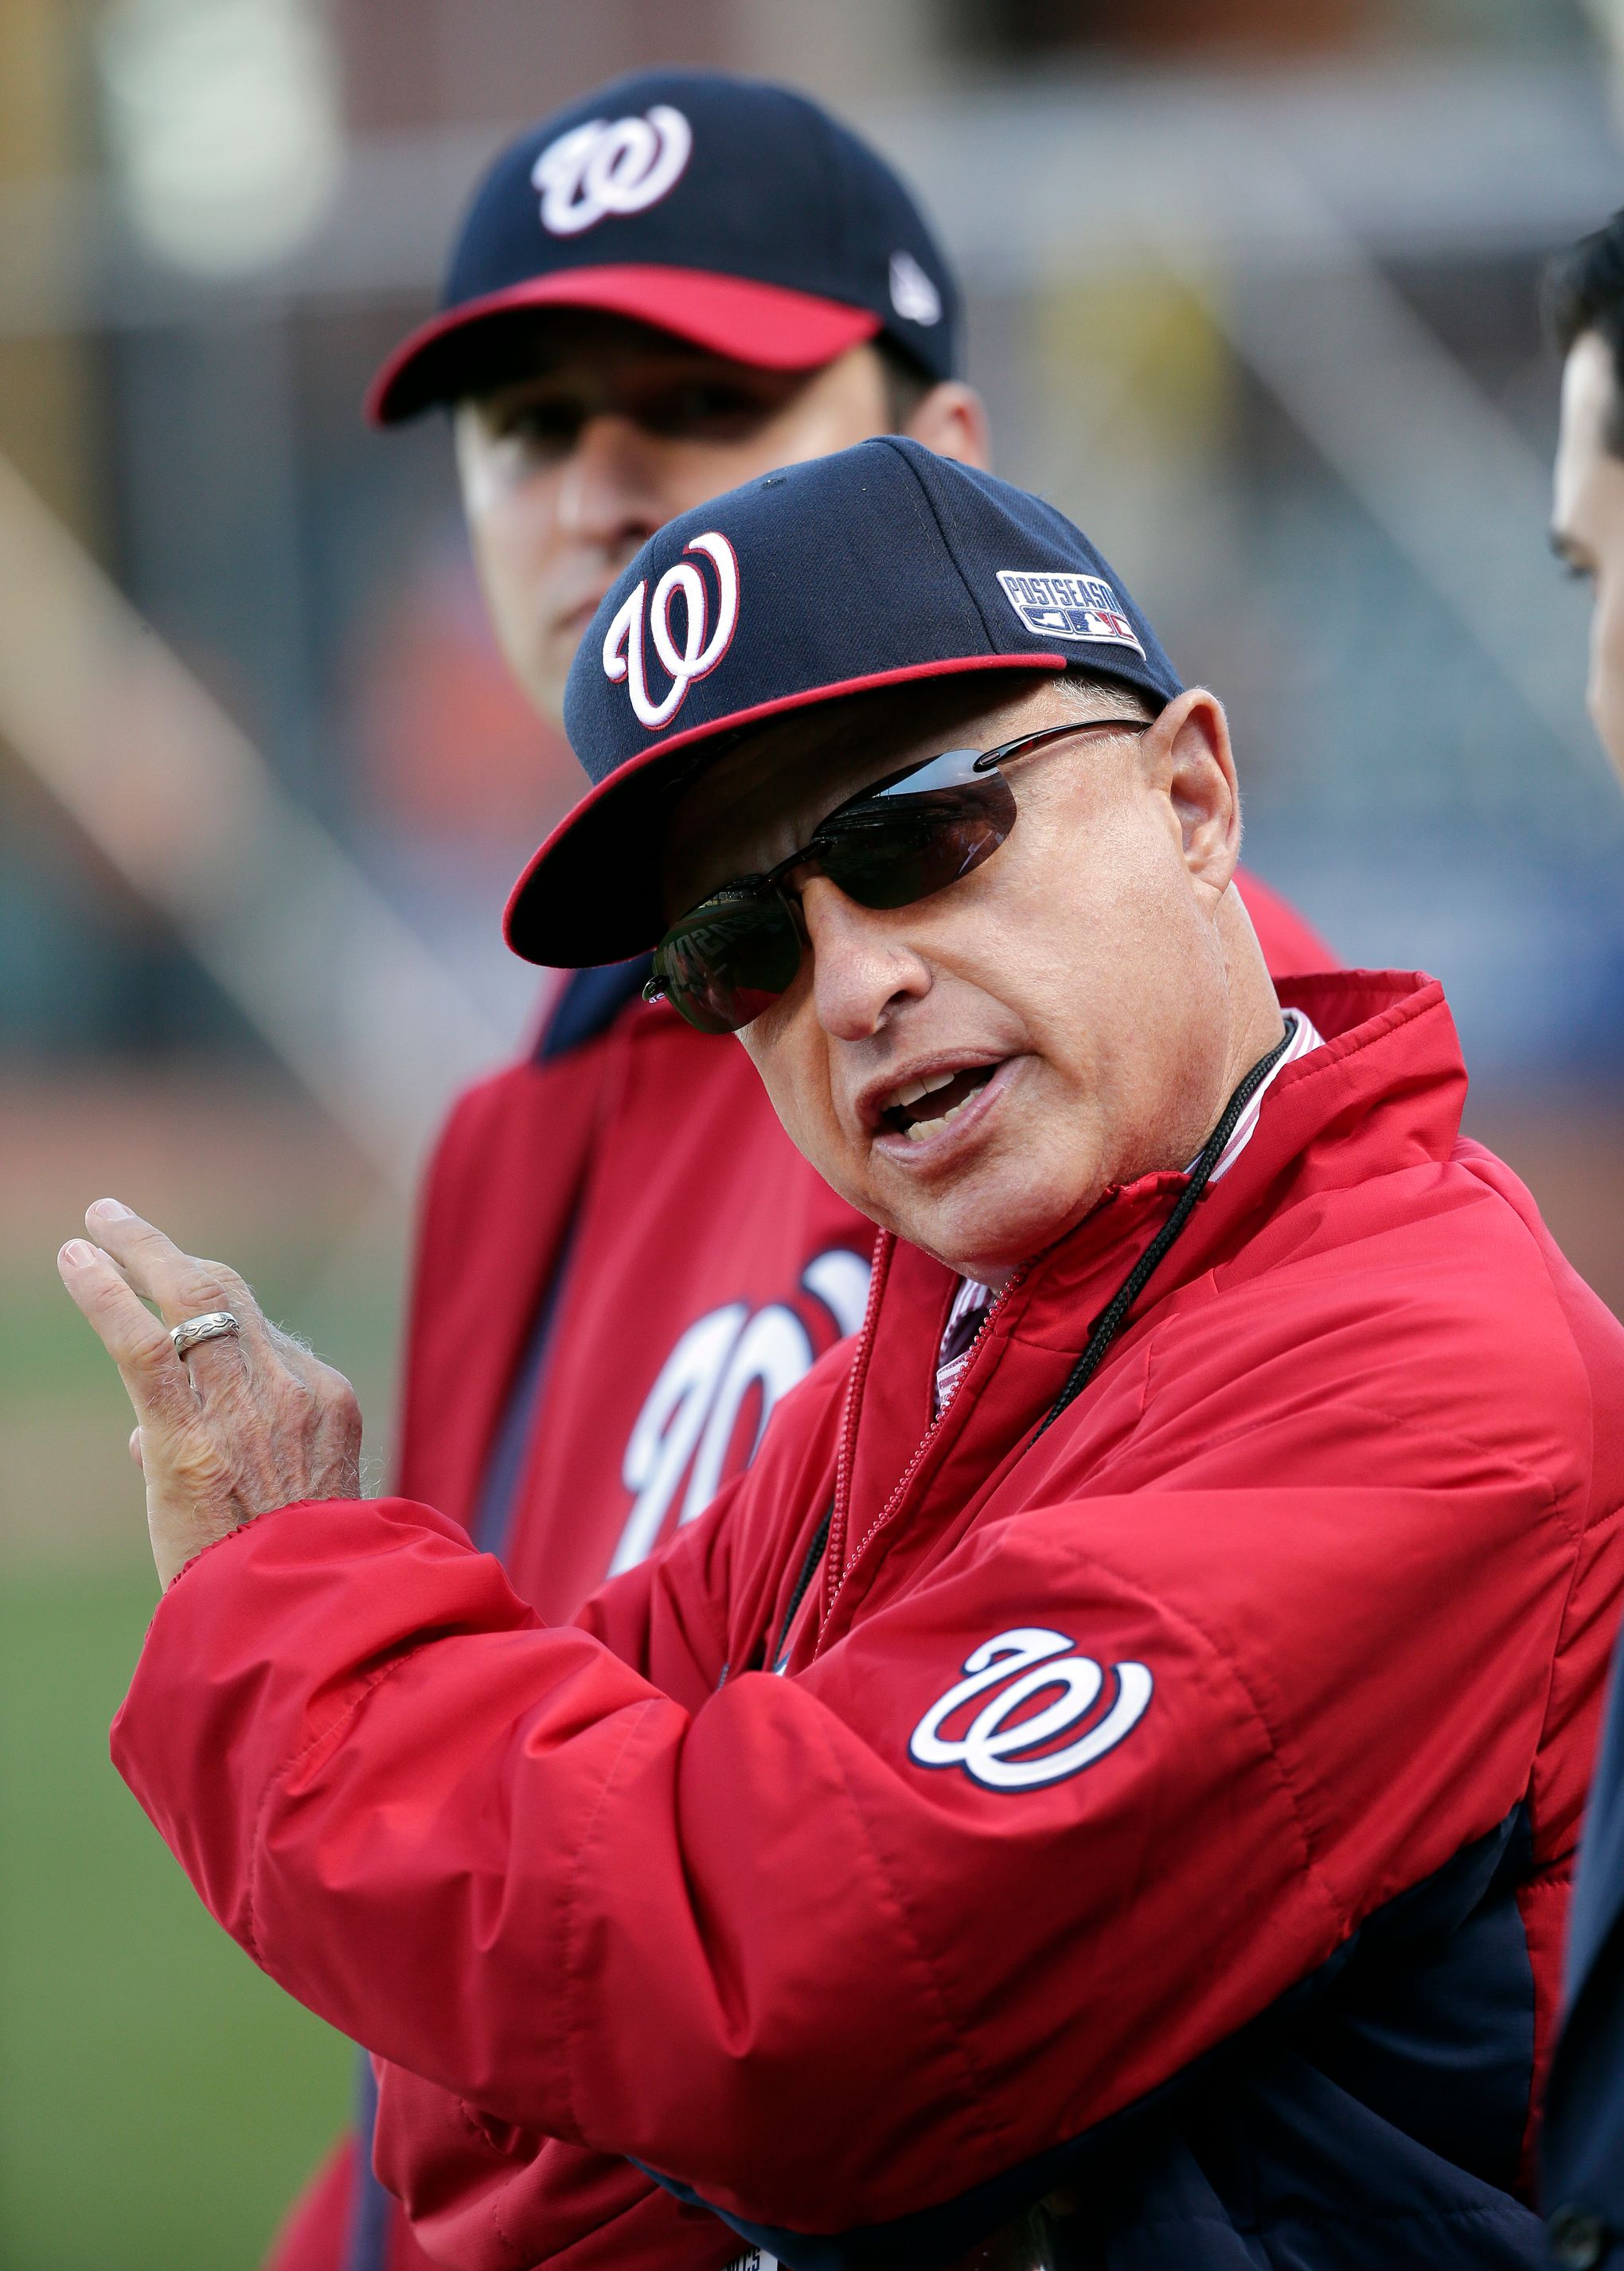 A letter to Nationals fans from Mark D. Lerner